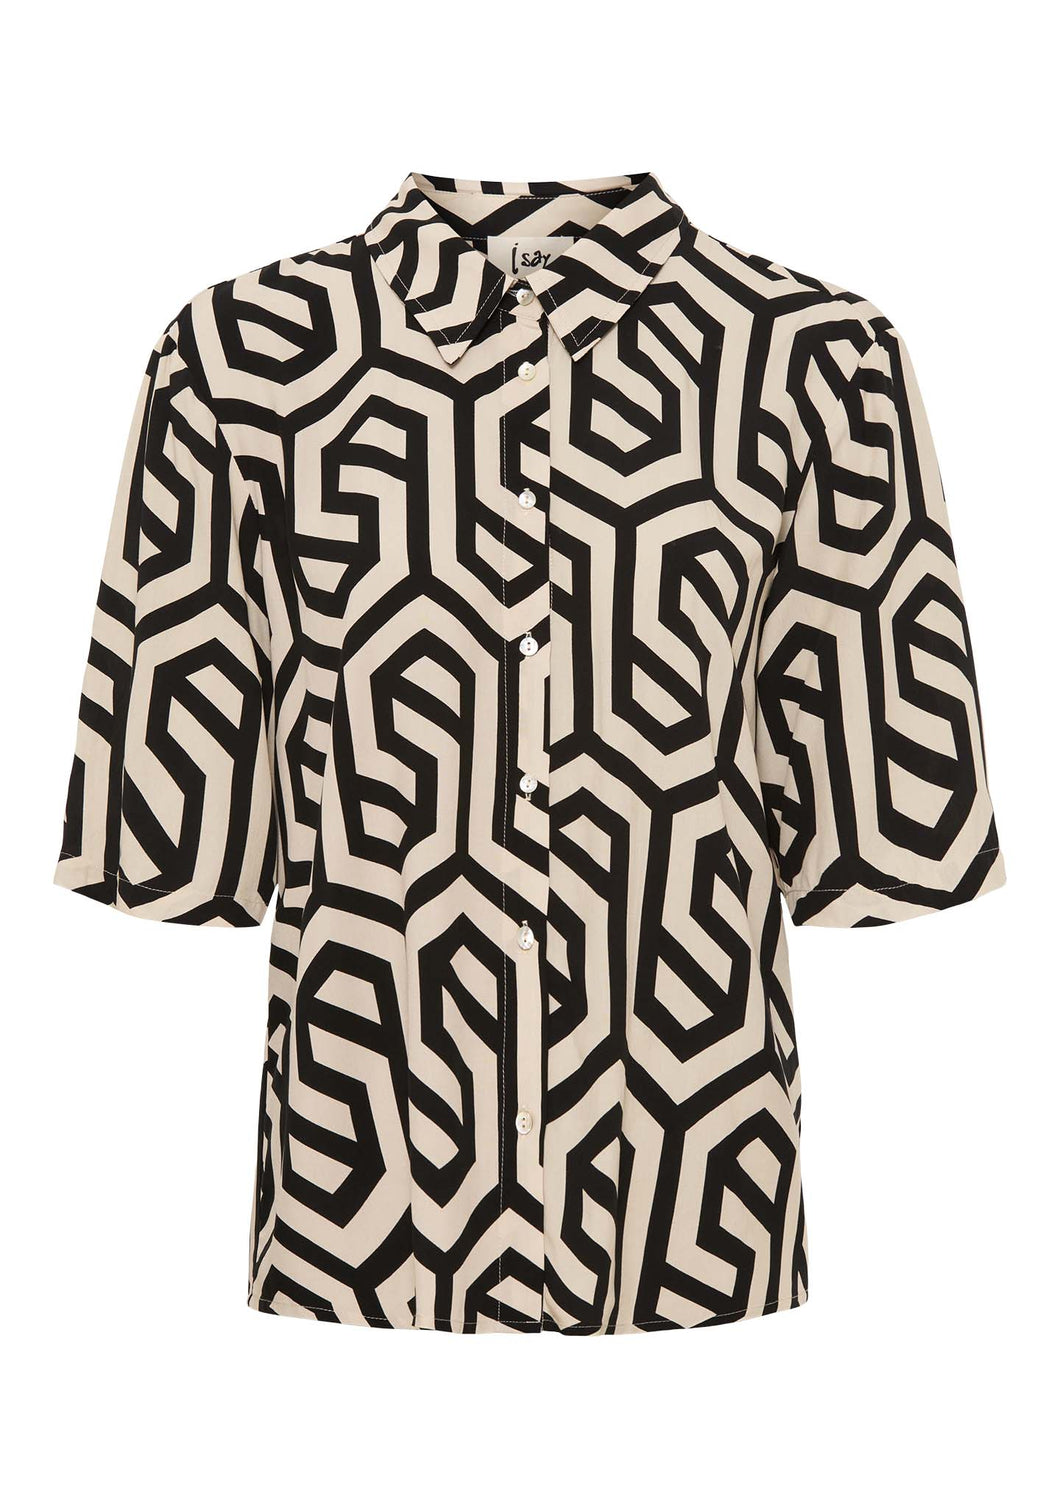 Isay Annica s/s shirt, big graphic